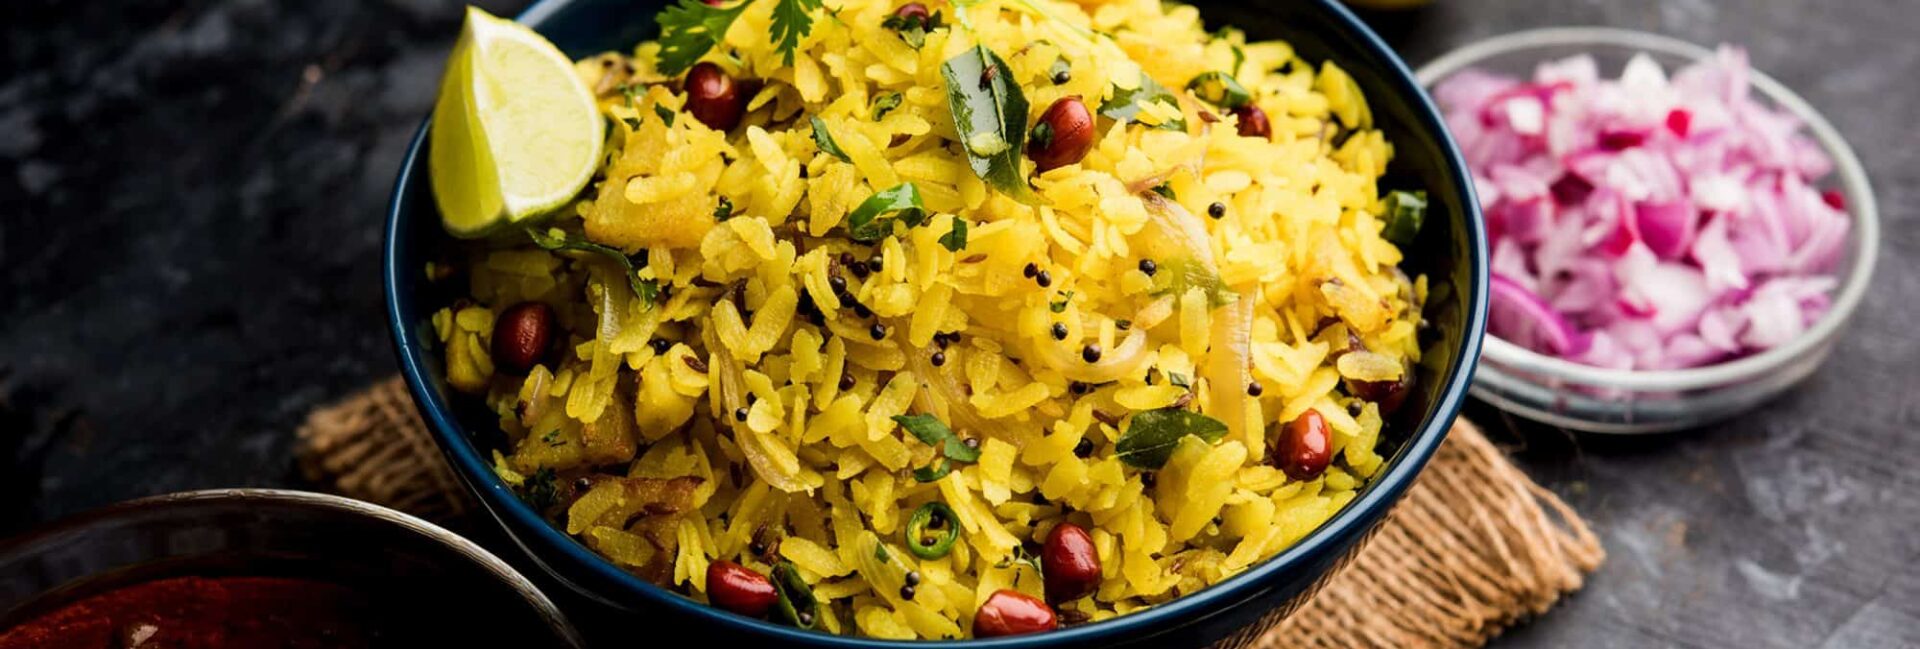 how to make poha at home